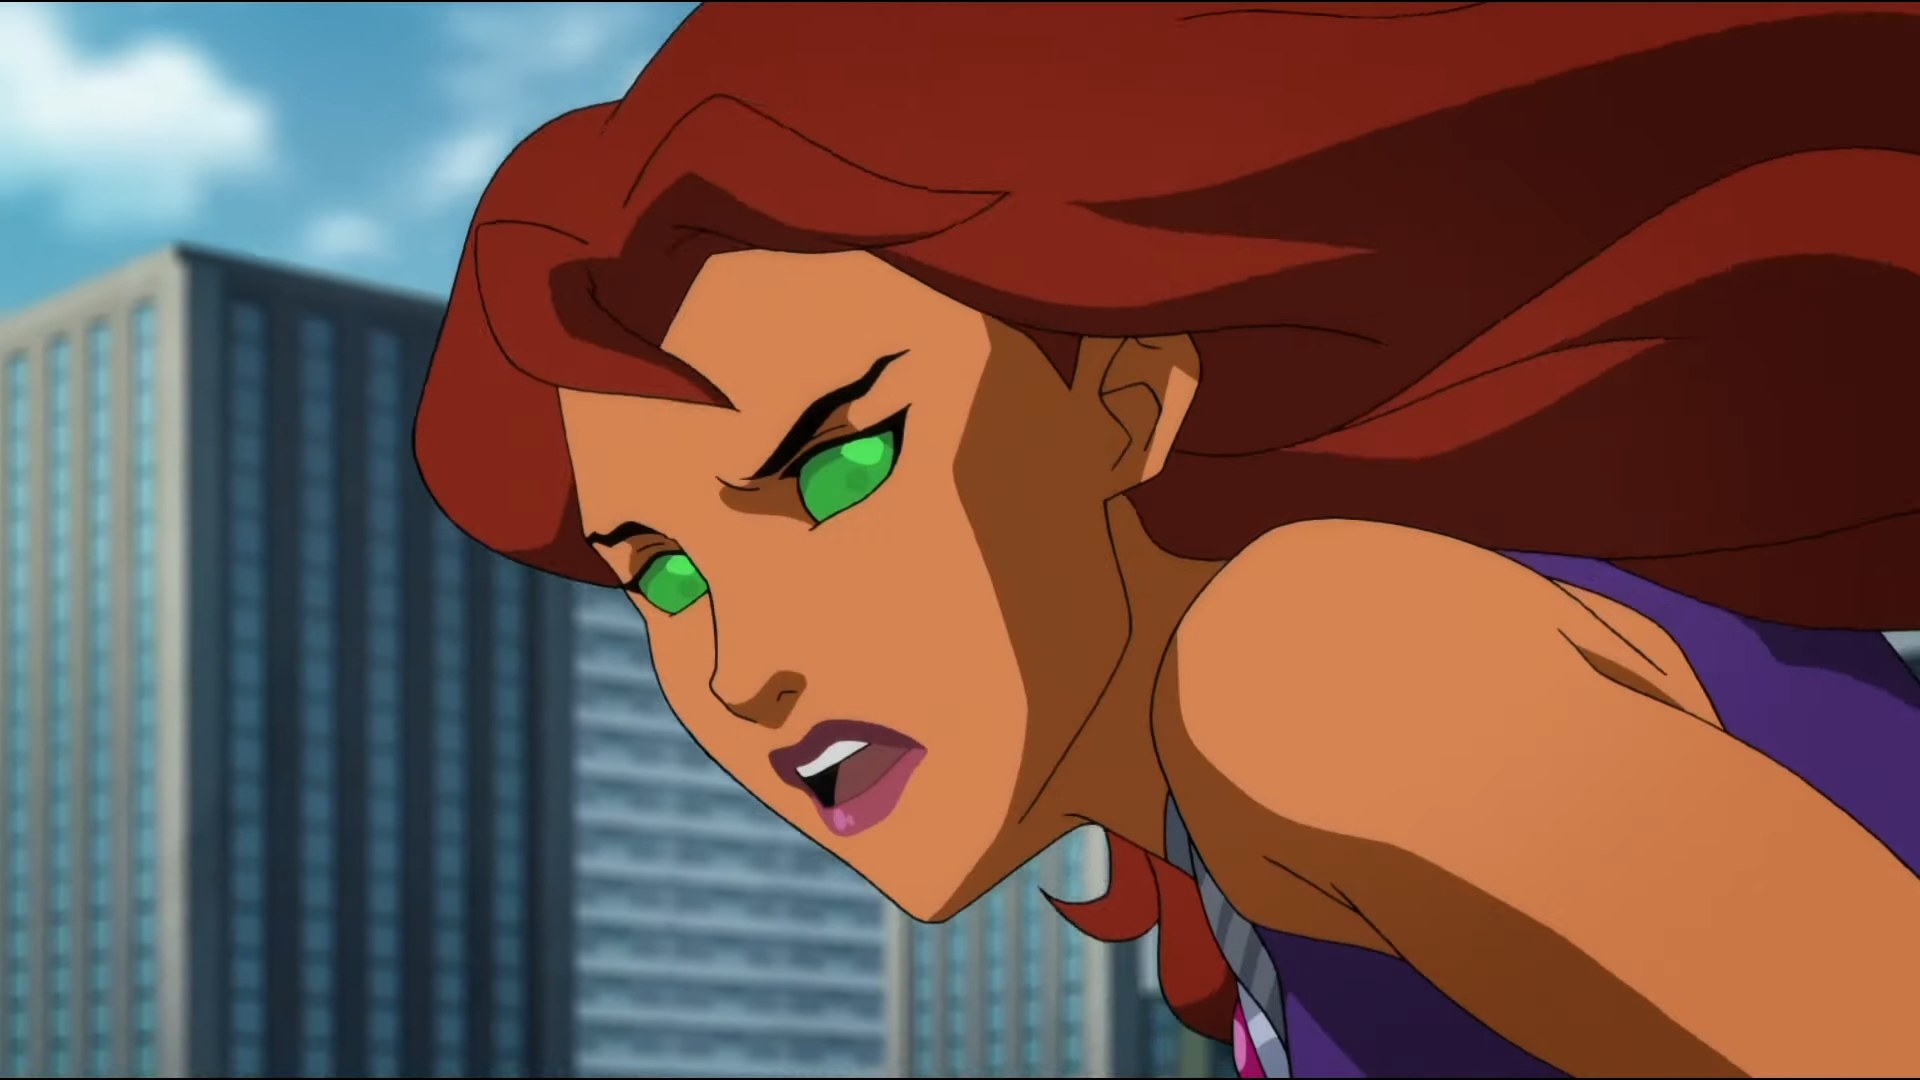 Starfire flying through the city in &quot;Teen Titans: The Judas Contract&quot;